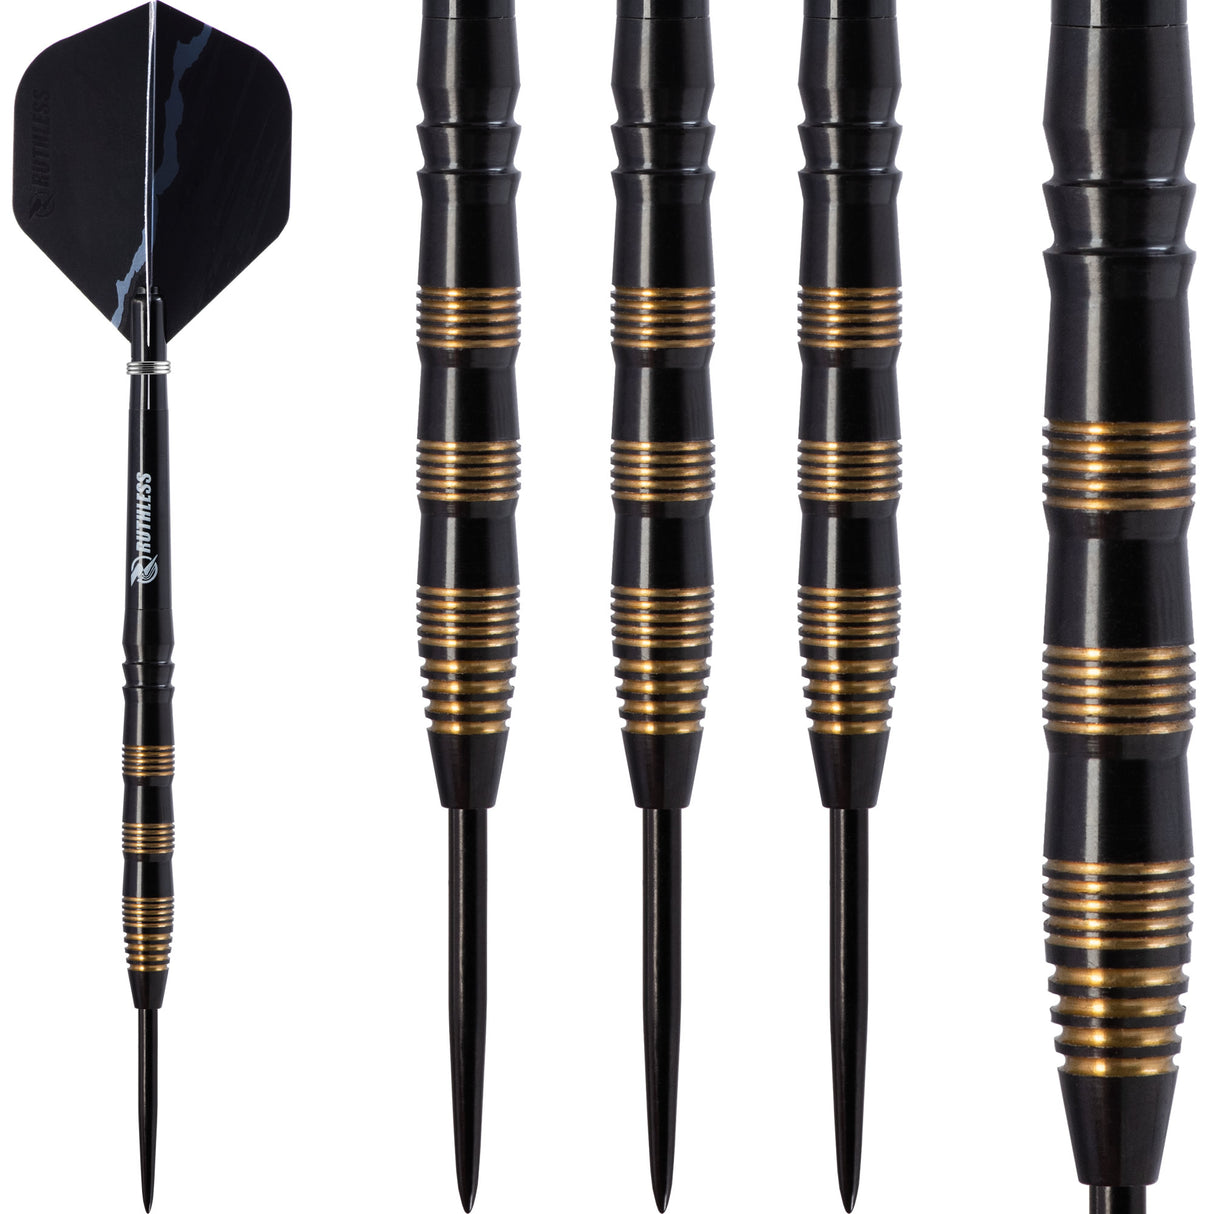 Ruthless Black Eagle Darts - Steel Tip Tungsten - Gold Ring